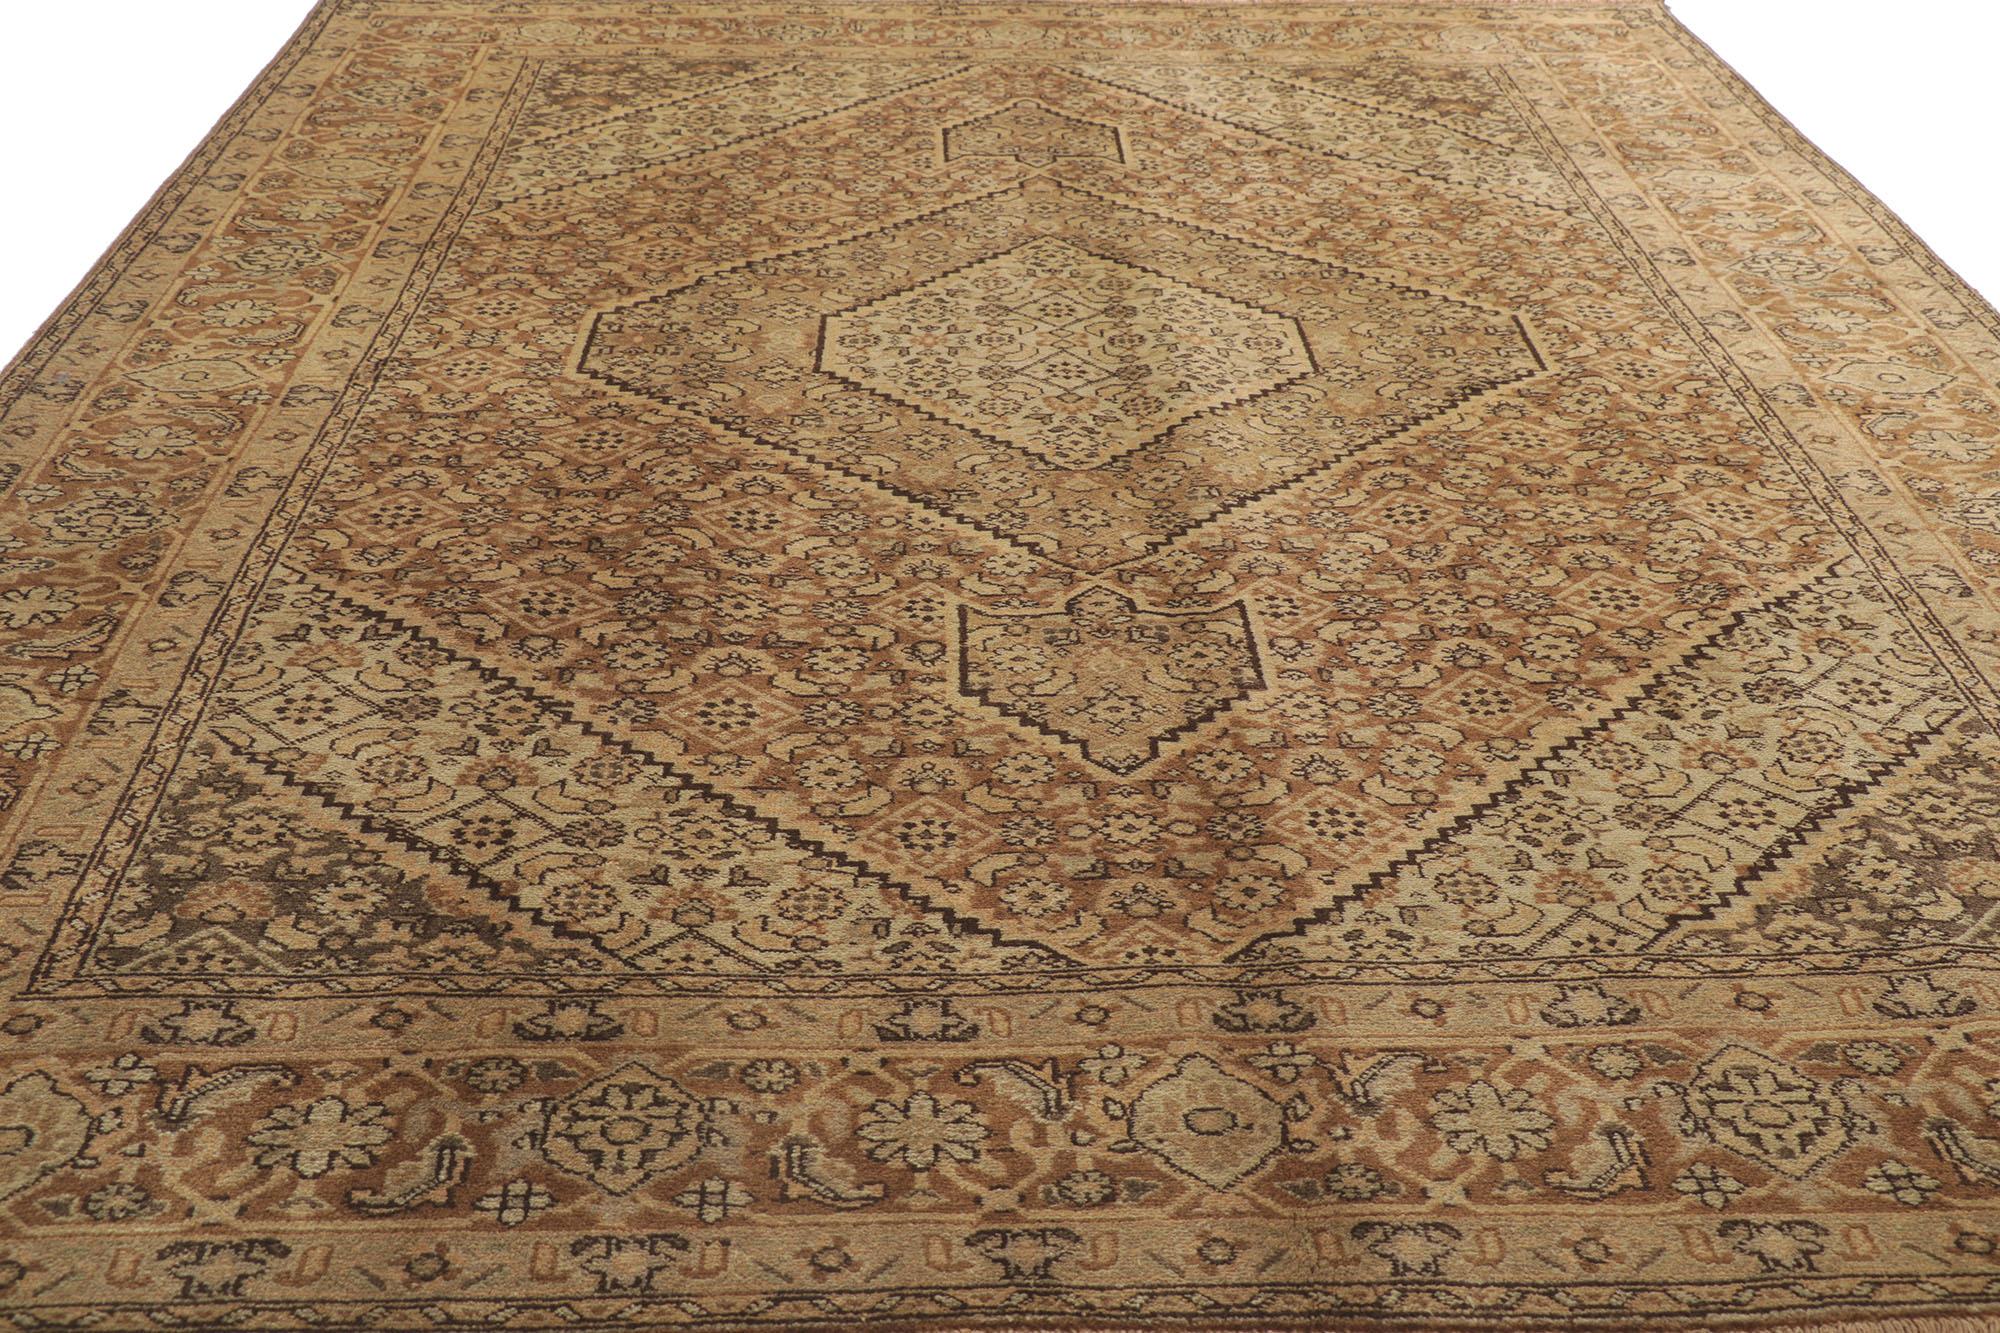 Hand-Knotted Vintage Azerbaijan Persian Rug with Mahi Fish Design, Neutral Color Area Rug